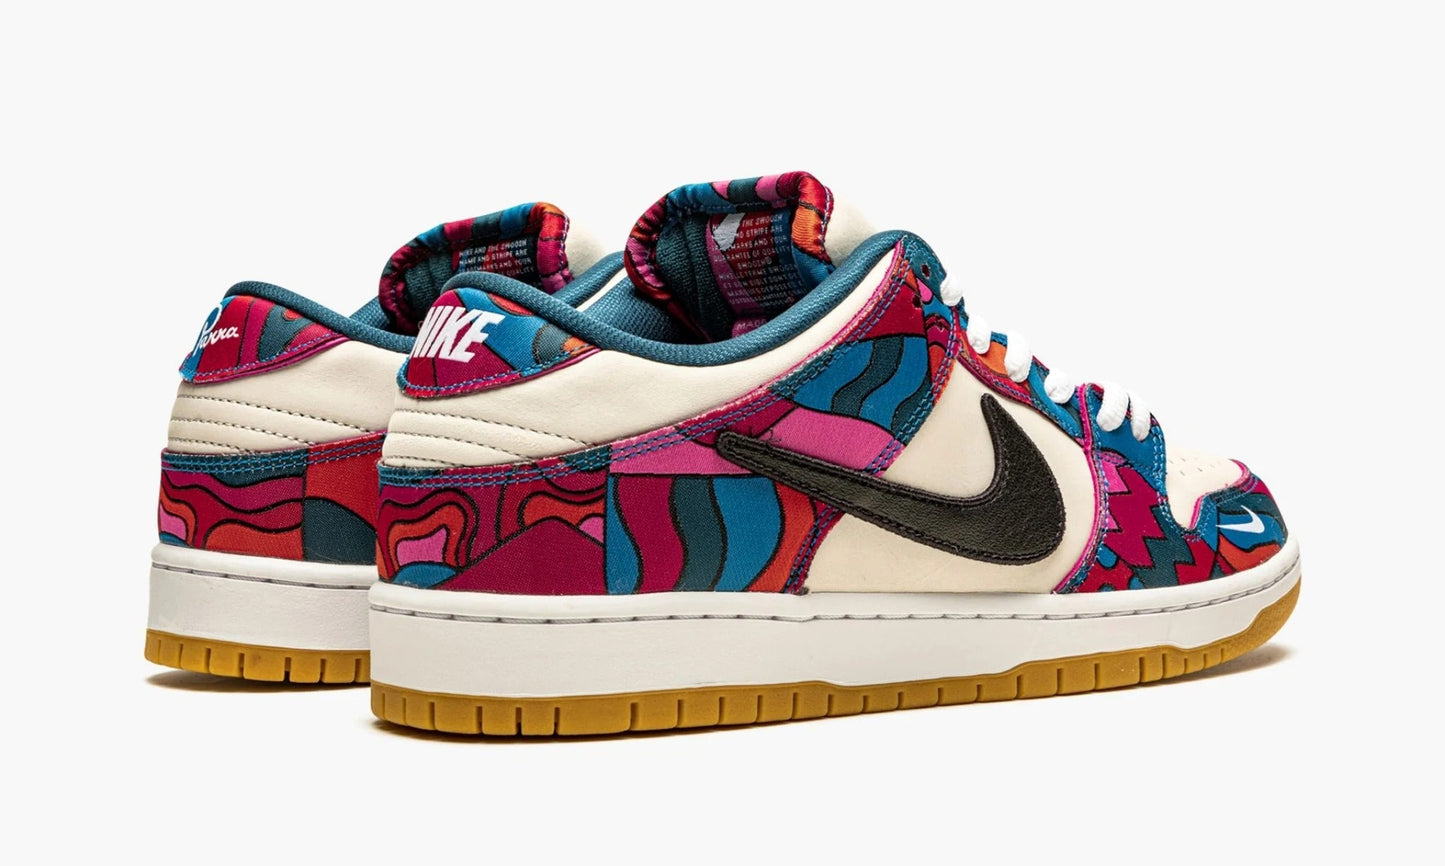 Dunk SB Low Parra Abstract Art - DH7695 600 | The Sortage